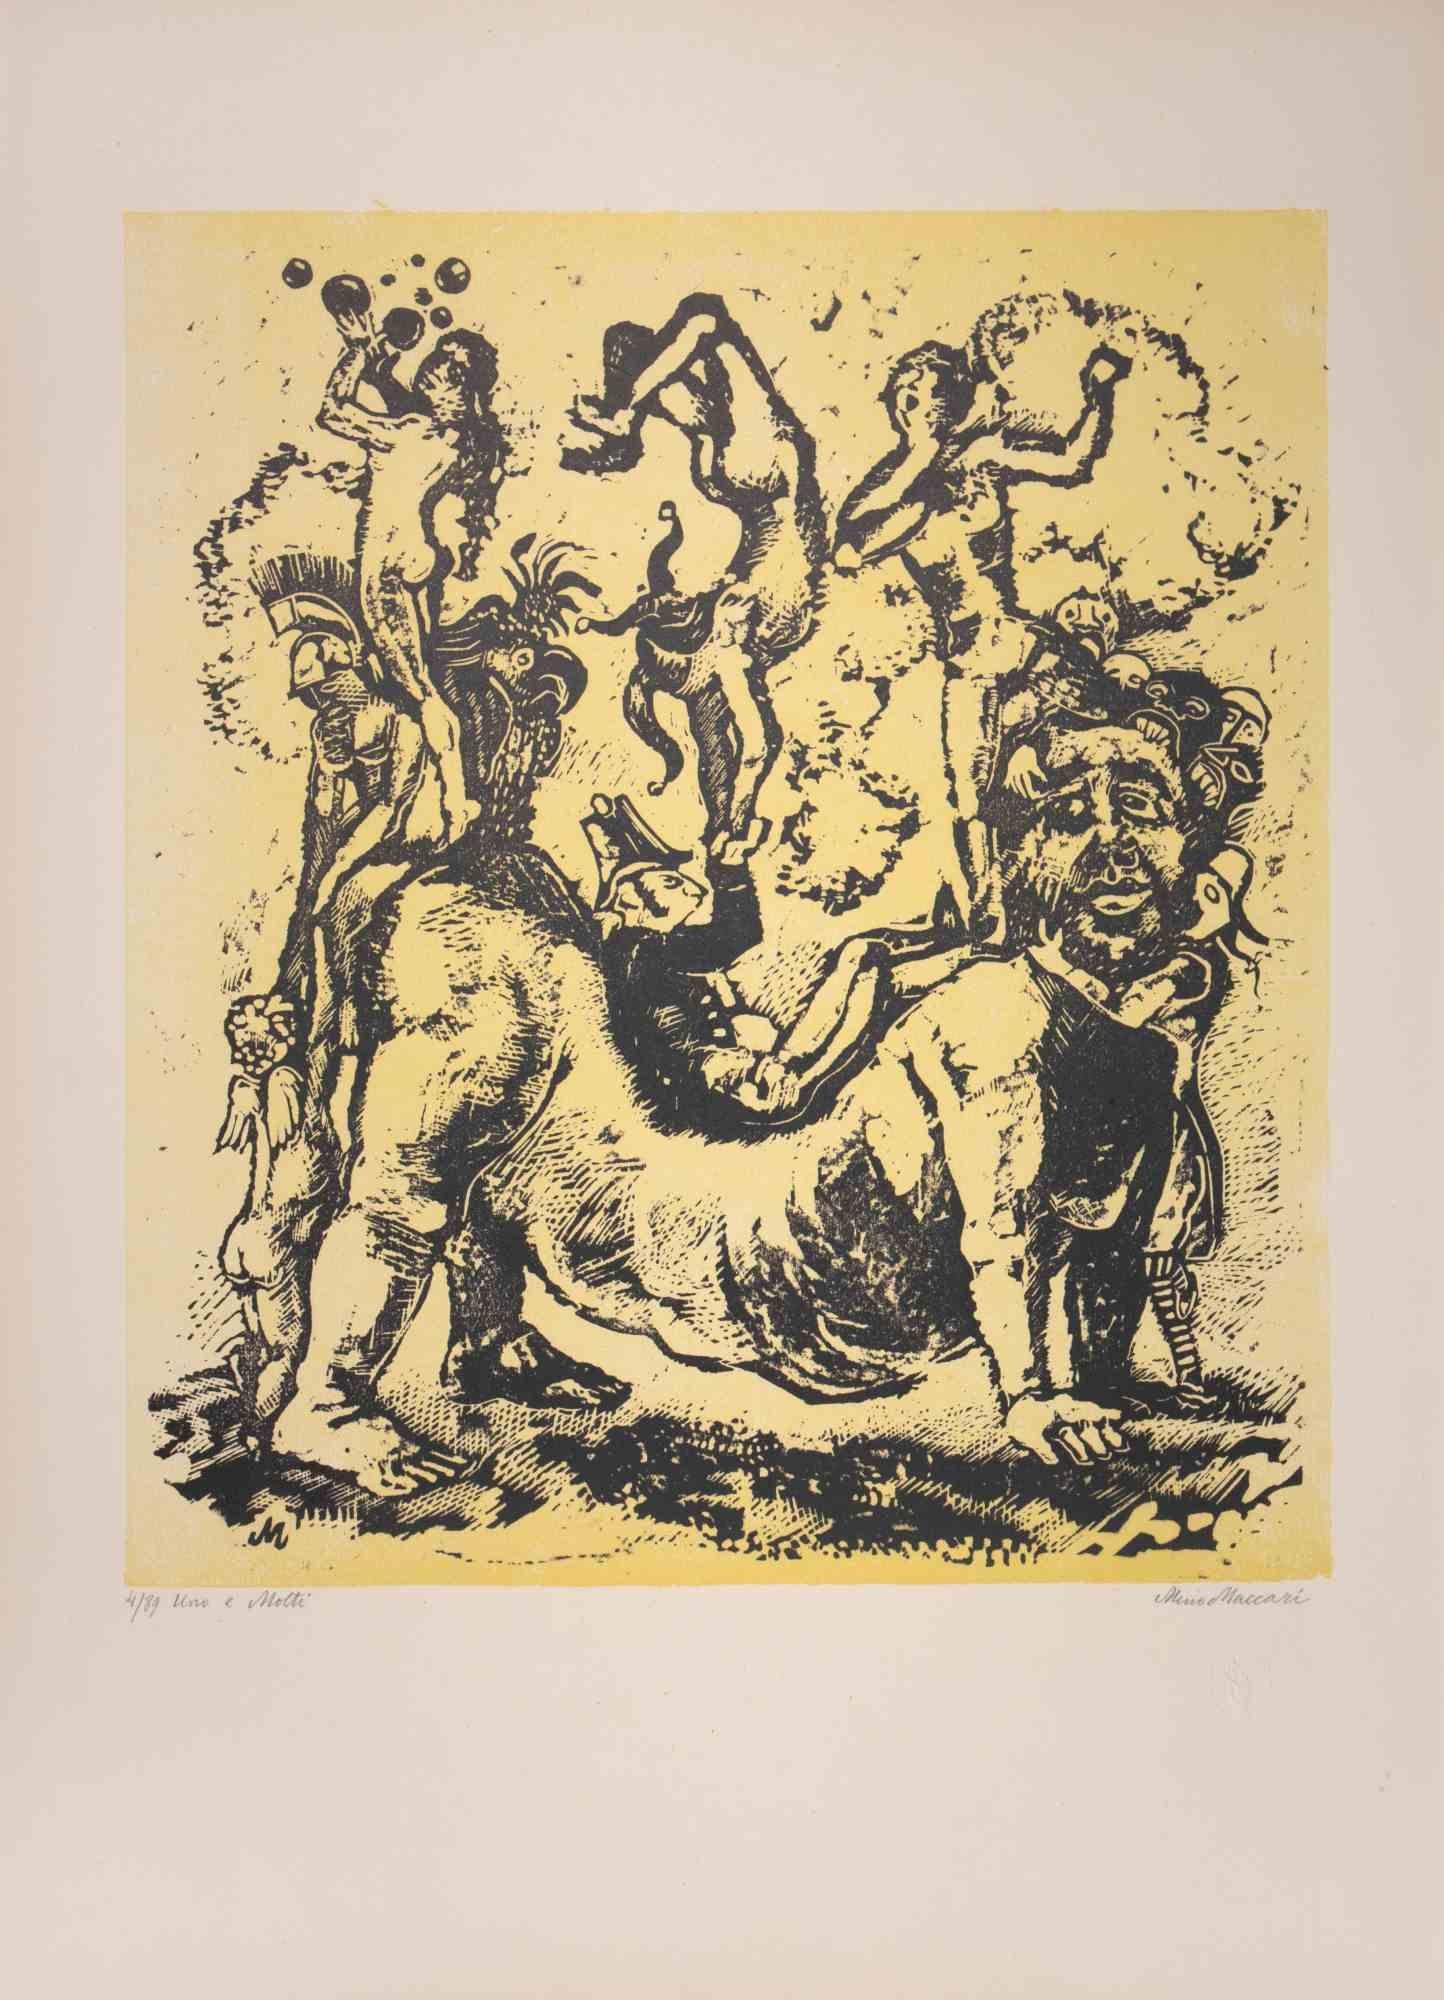 The One and the Many is an Artwork realized by Mino Maccari  (1924-1989) in 1943.

Colored woodcut on paper. Hand-signed on the lower, numbered 4/89 specimens and titled on the left margin.

Good conditions.

Mino Maccari (Siena, 1924-Rome, June 16,